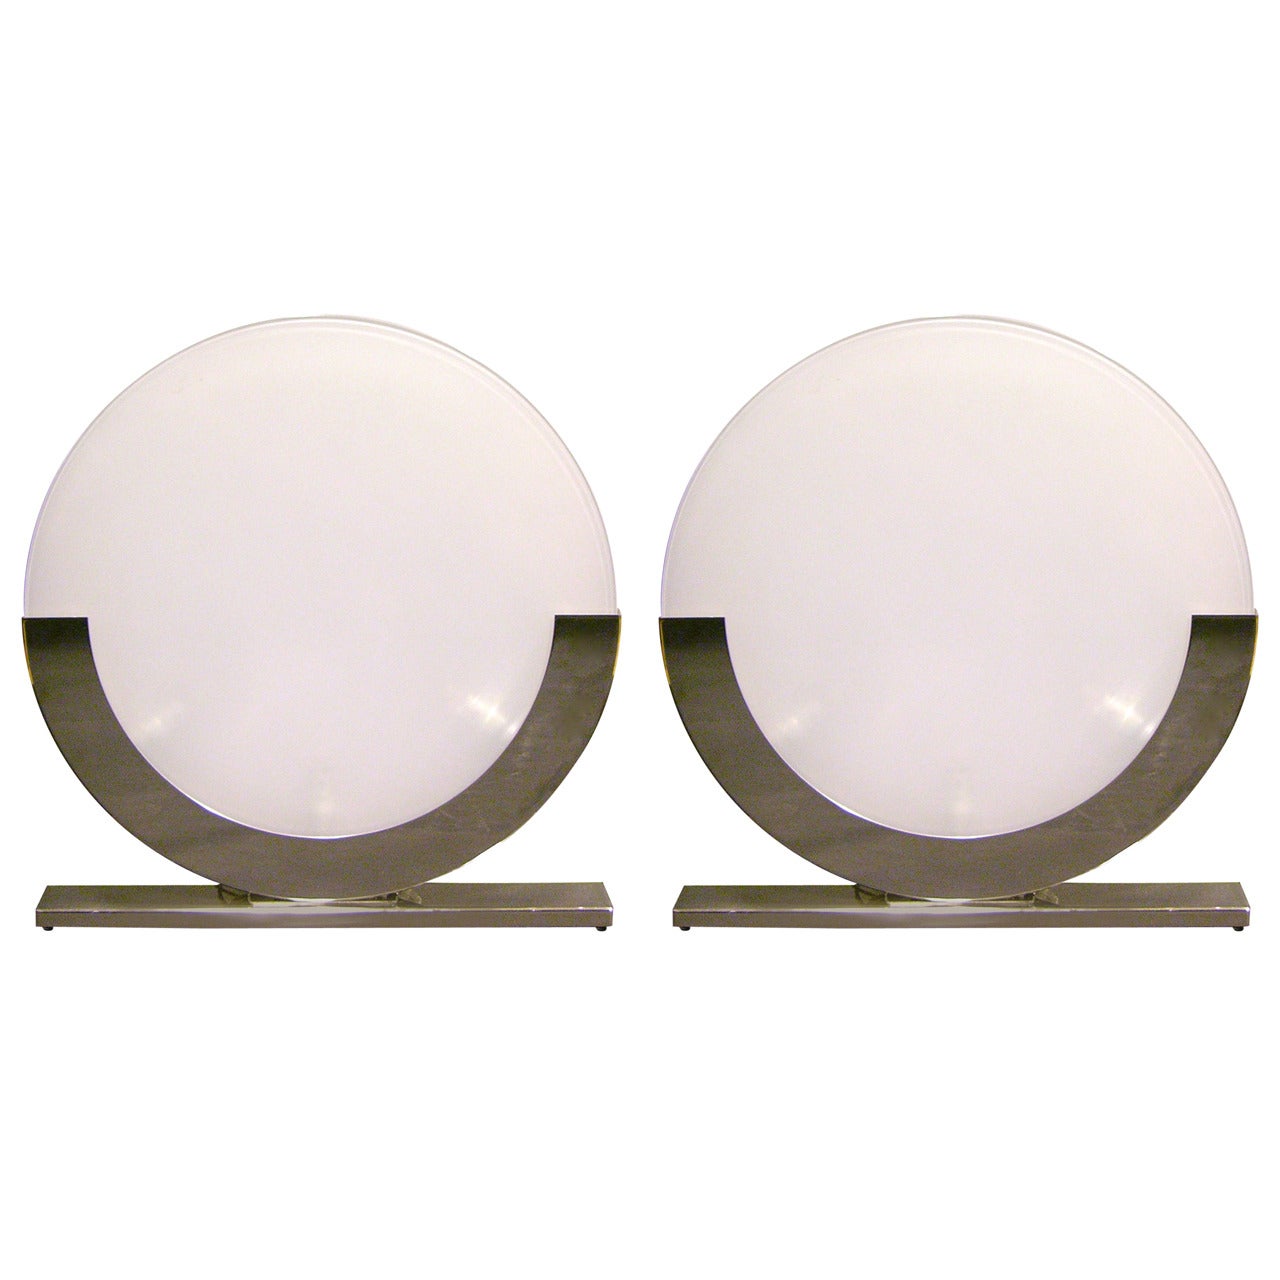 Modern Italian Design Pair of White and Chrome Round Table Lamps, 1990 